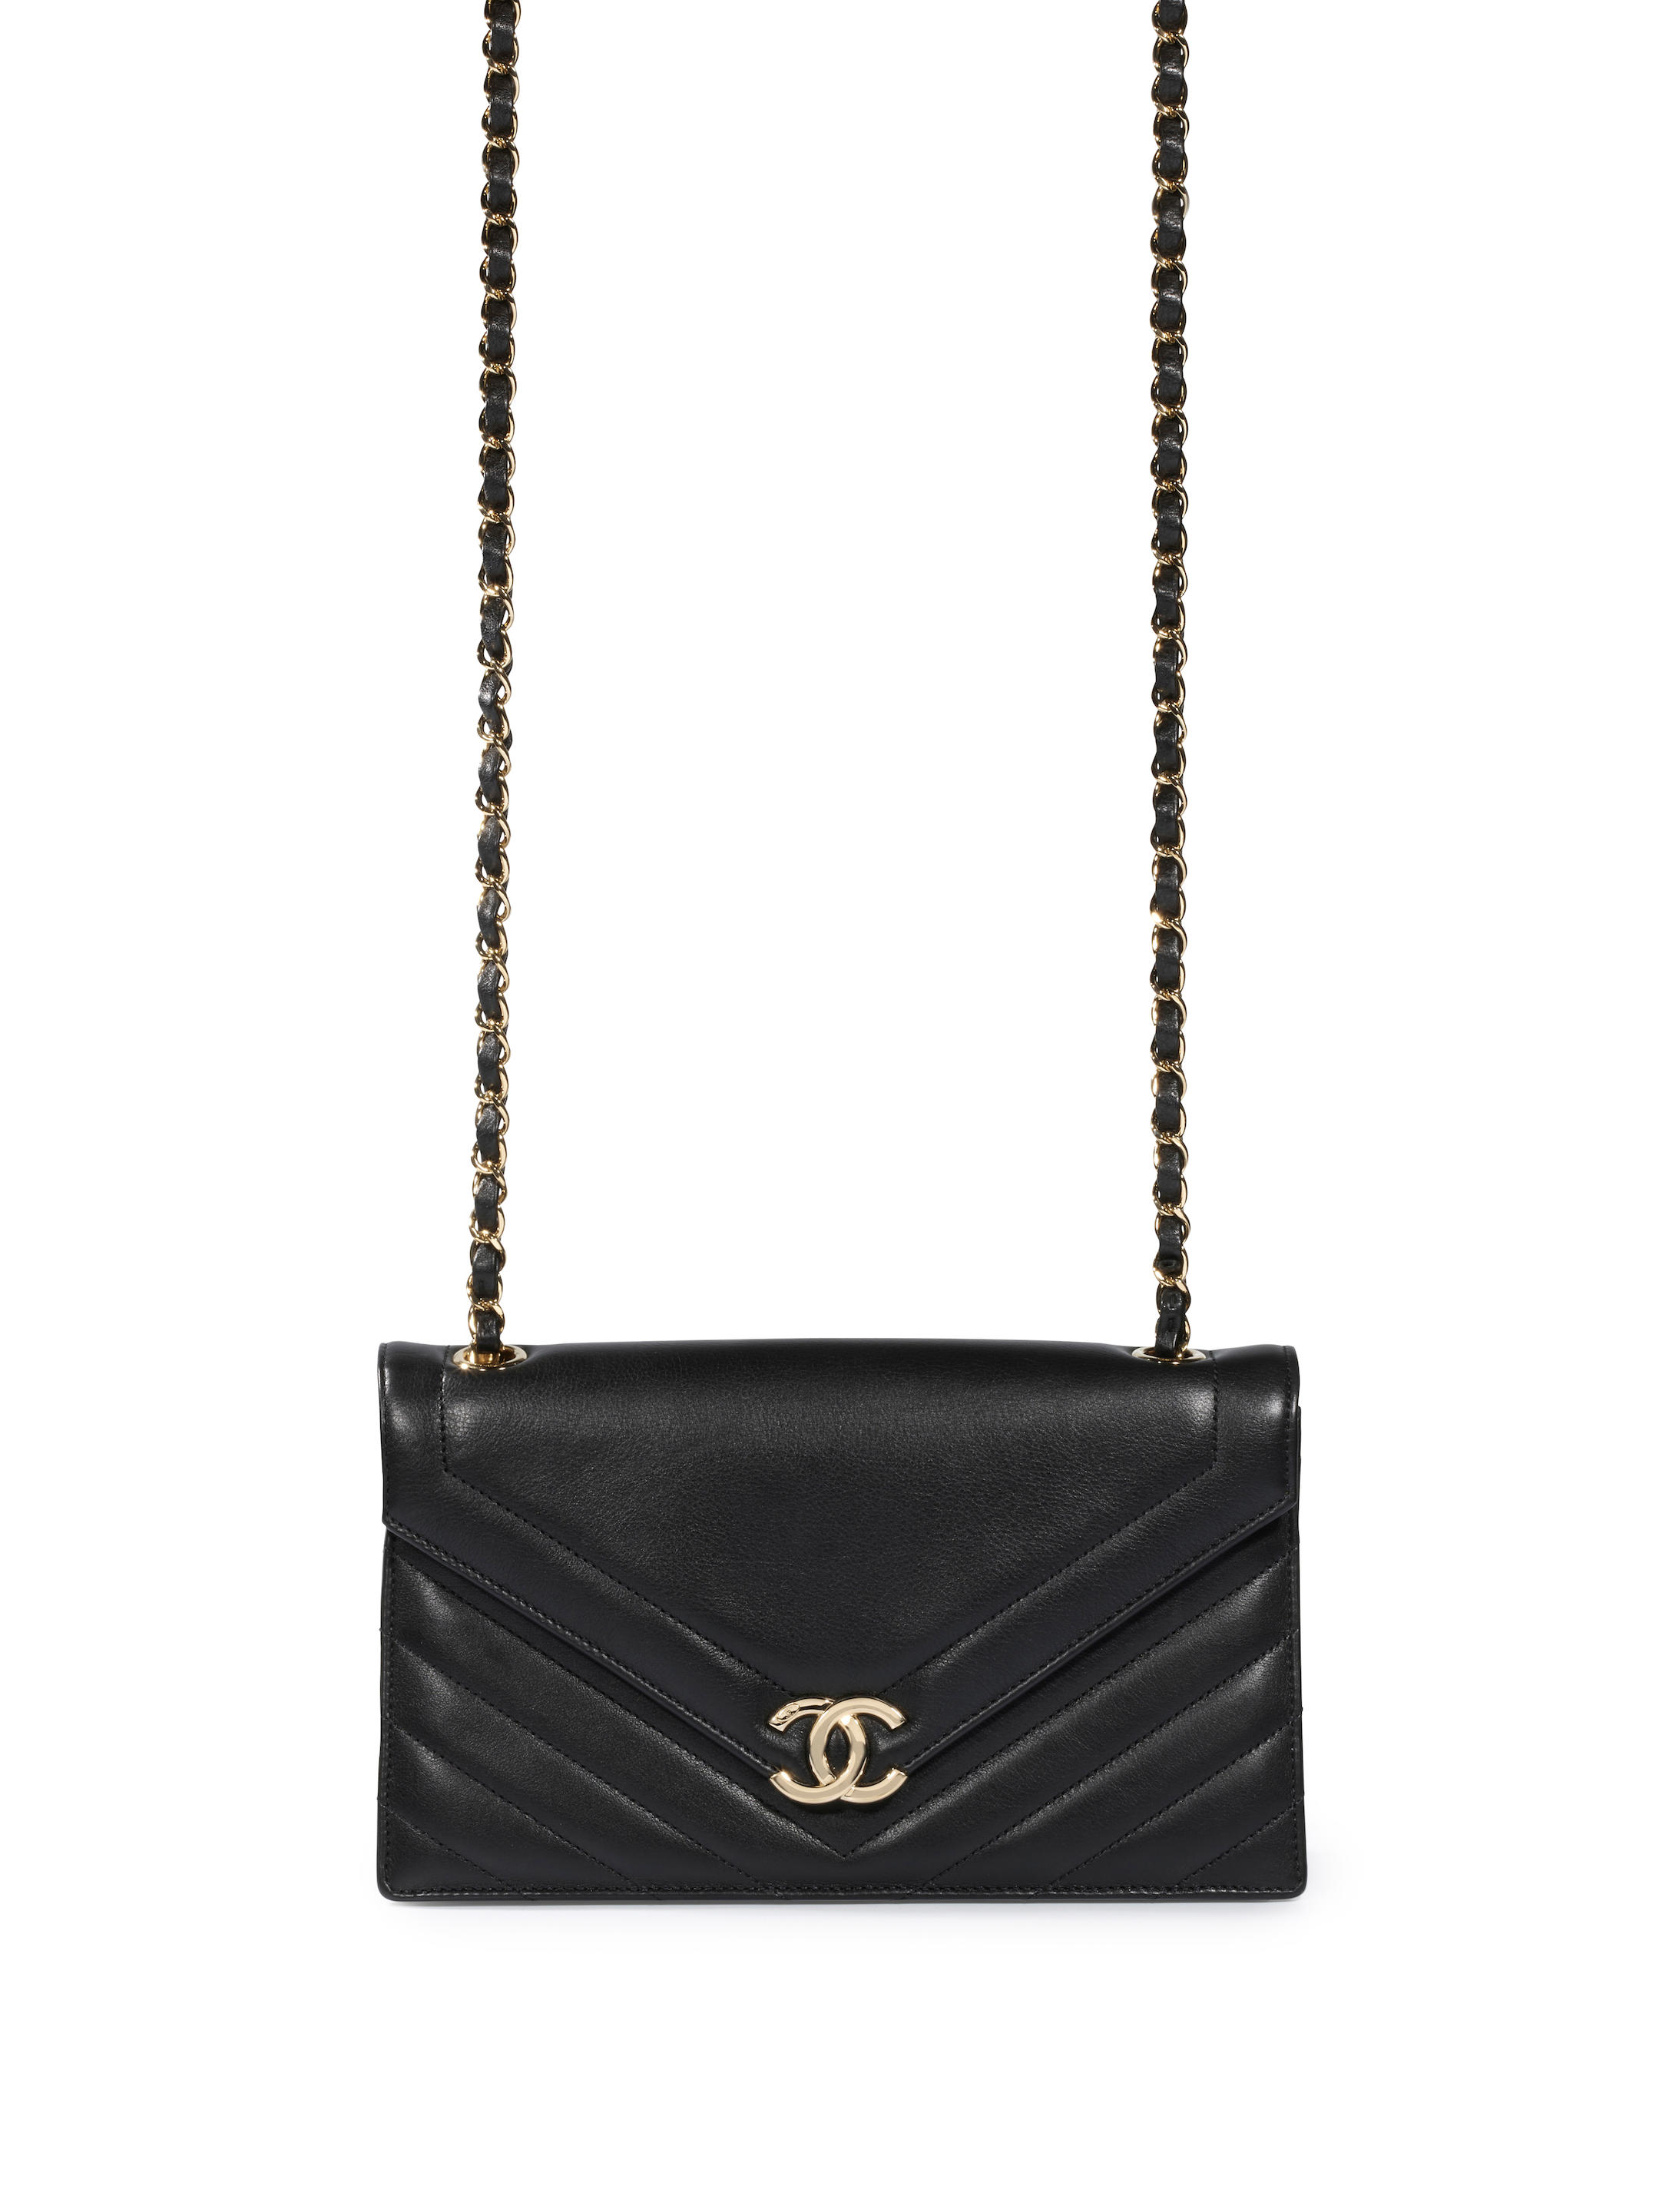 Bonhams : CHANEL BLACK LAMPSKIN ENVELOPE FLAP BAG WITH GOLD TONED CHAIN  (Includes authenticity card and original dust bag)